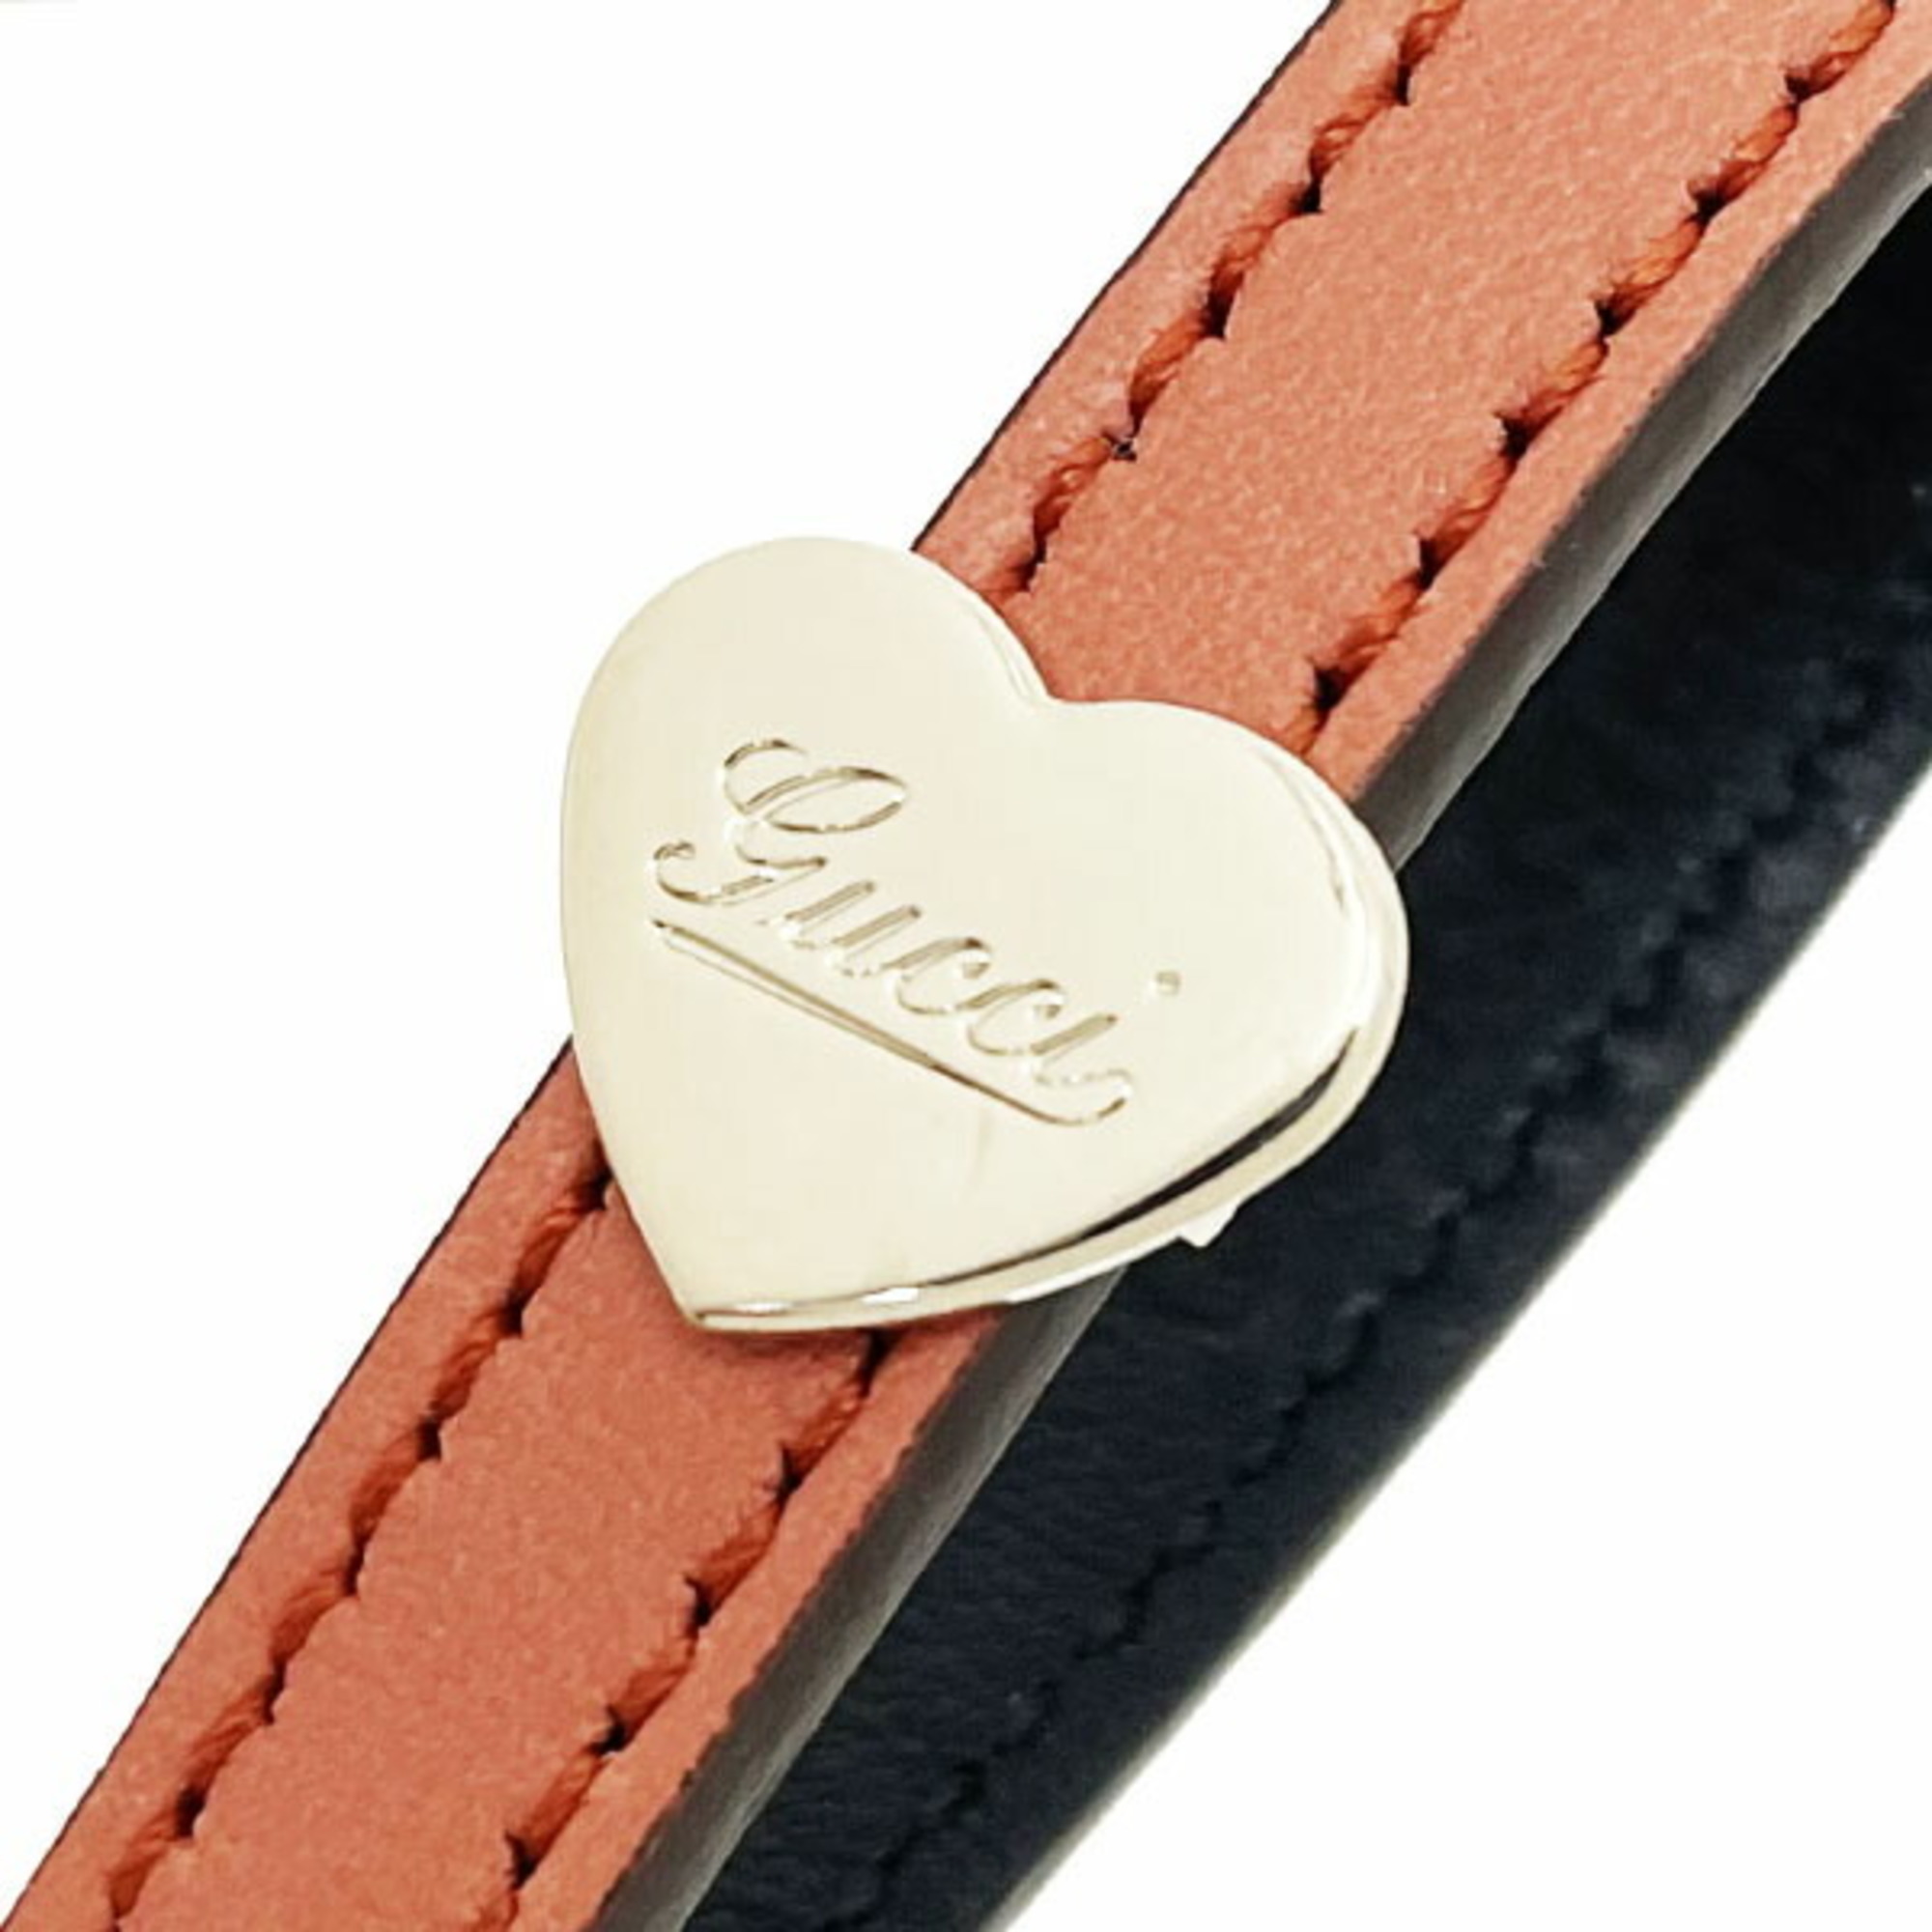 Gucci strap heart charm mobile phone leather coral pink 233172 GUCCI loop key holder hook KK-12786